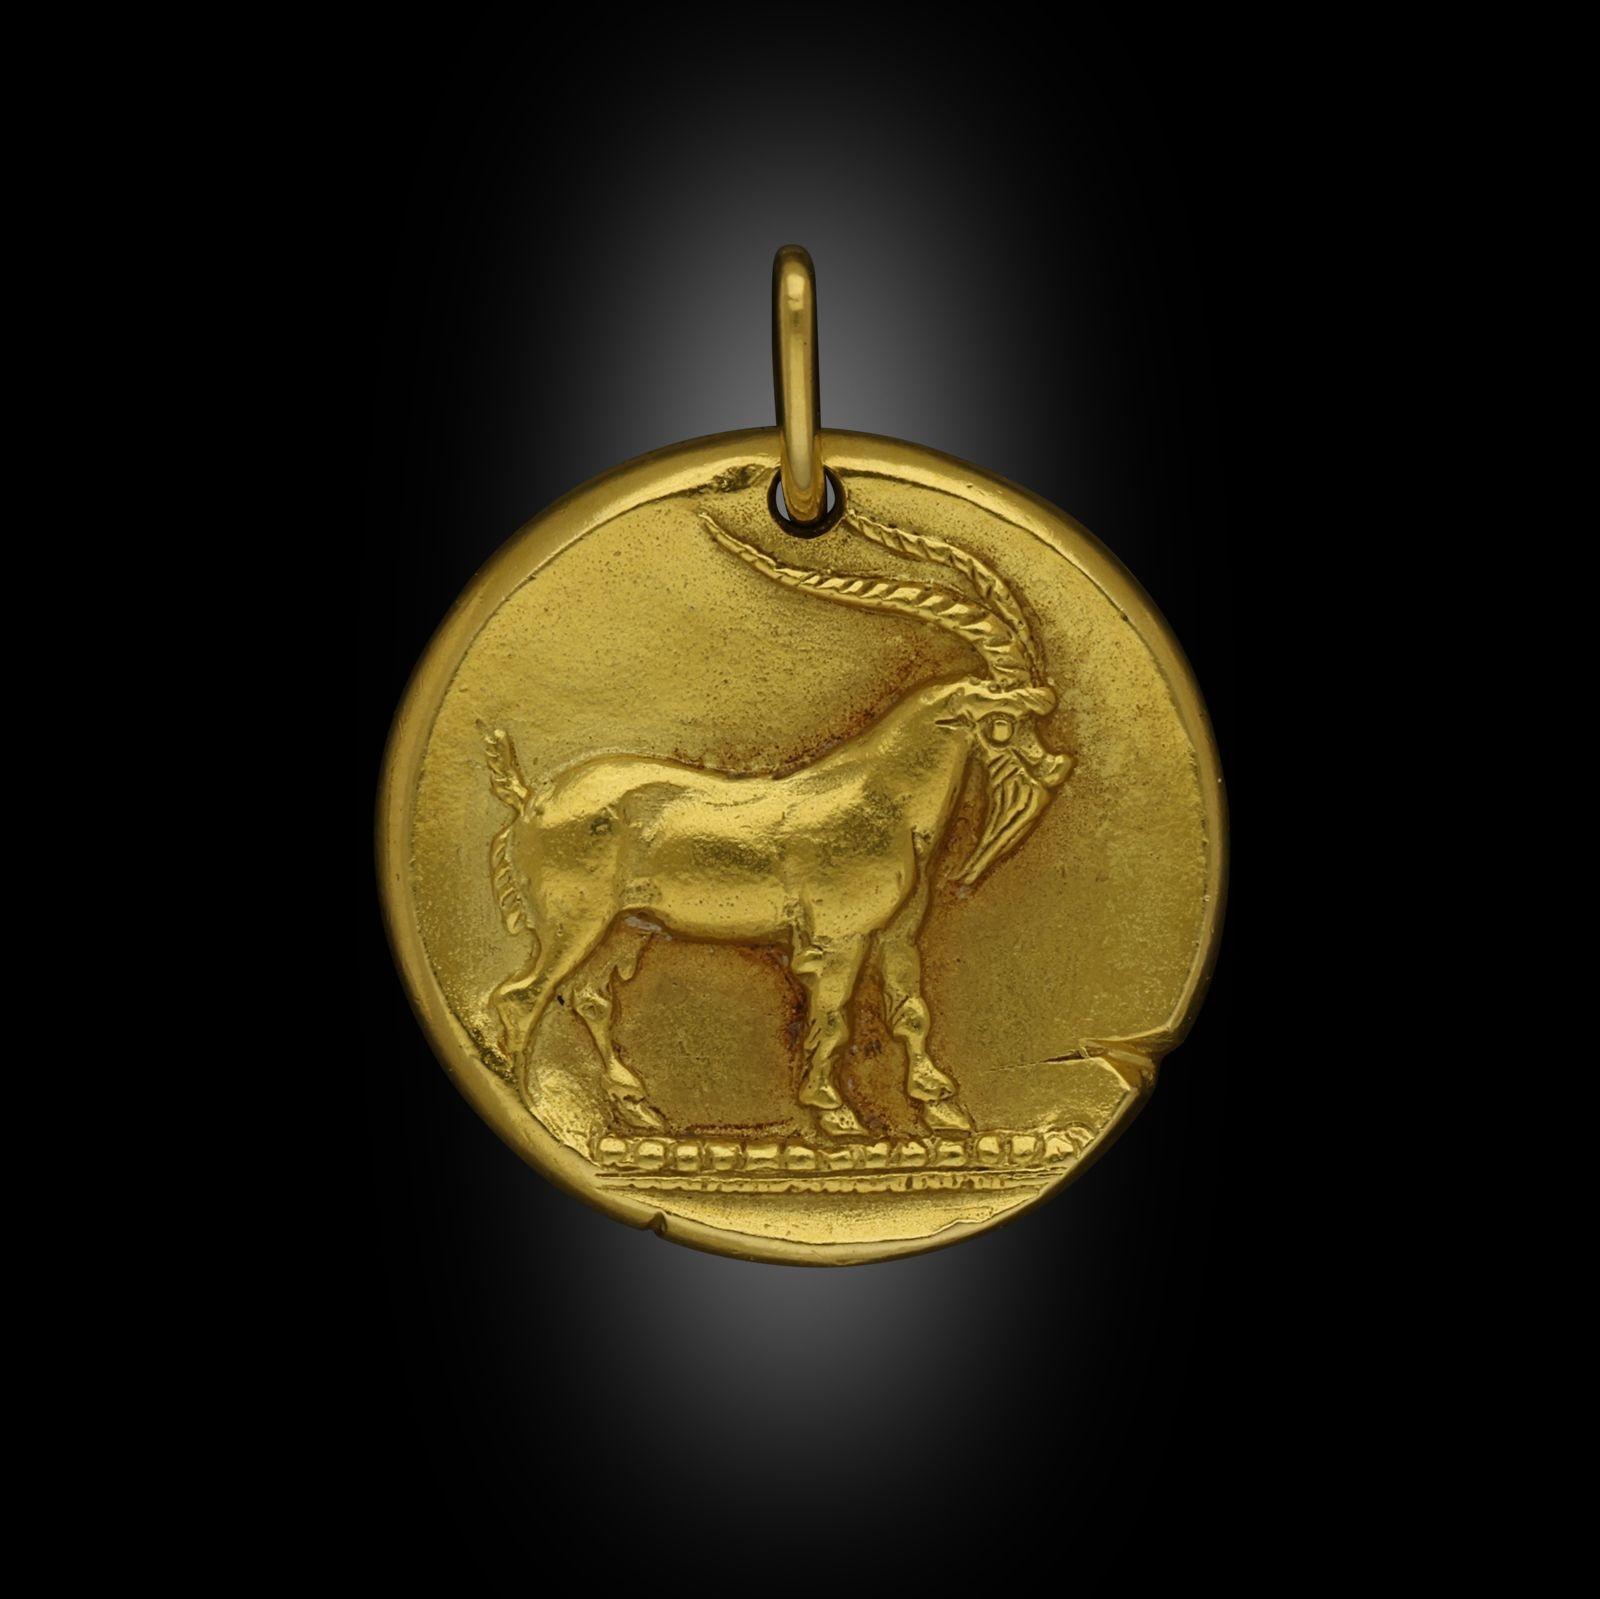 An 18ct gold Zodiac pendant by Georges Lenfant for Van Cleef & Arpels, circa 1960s, the round disc shaped pendant for the 10th sign Capricorn designed as an ancient coin, the front with a raised image of a standing goat facing left and the reverse